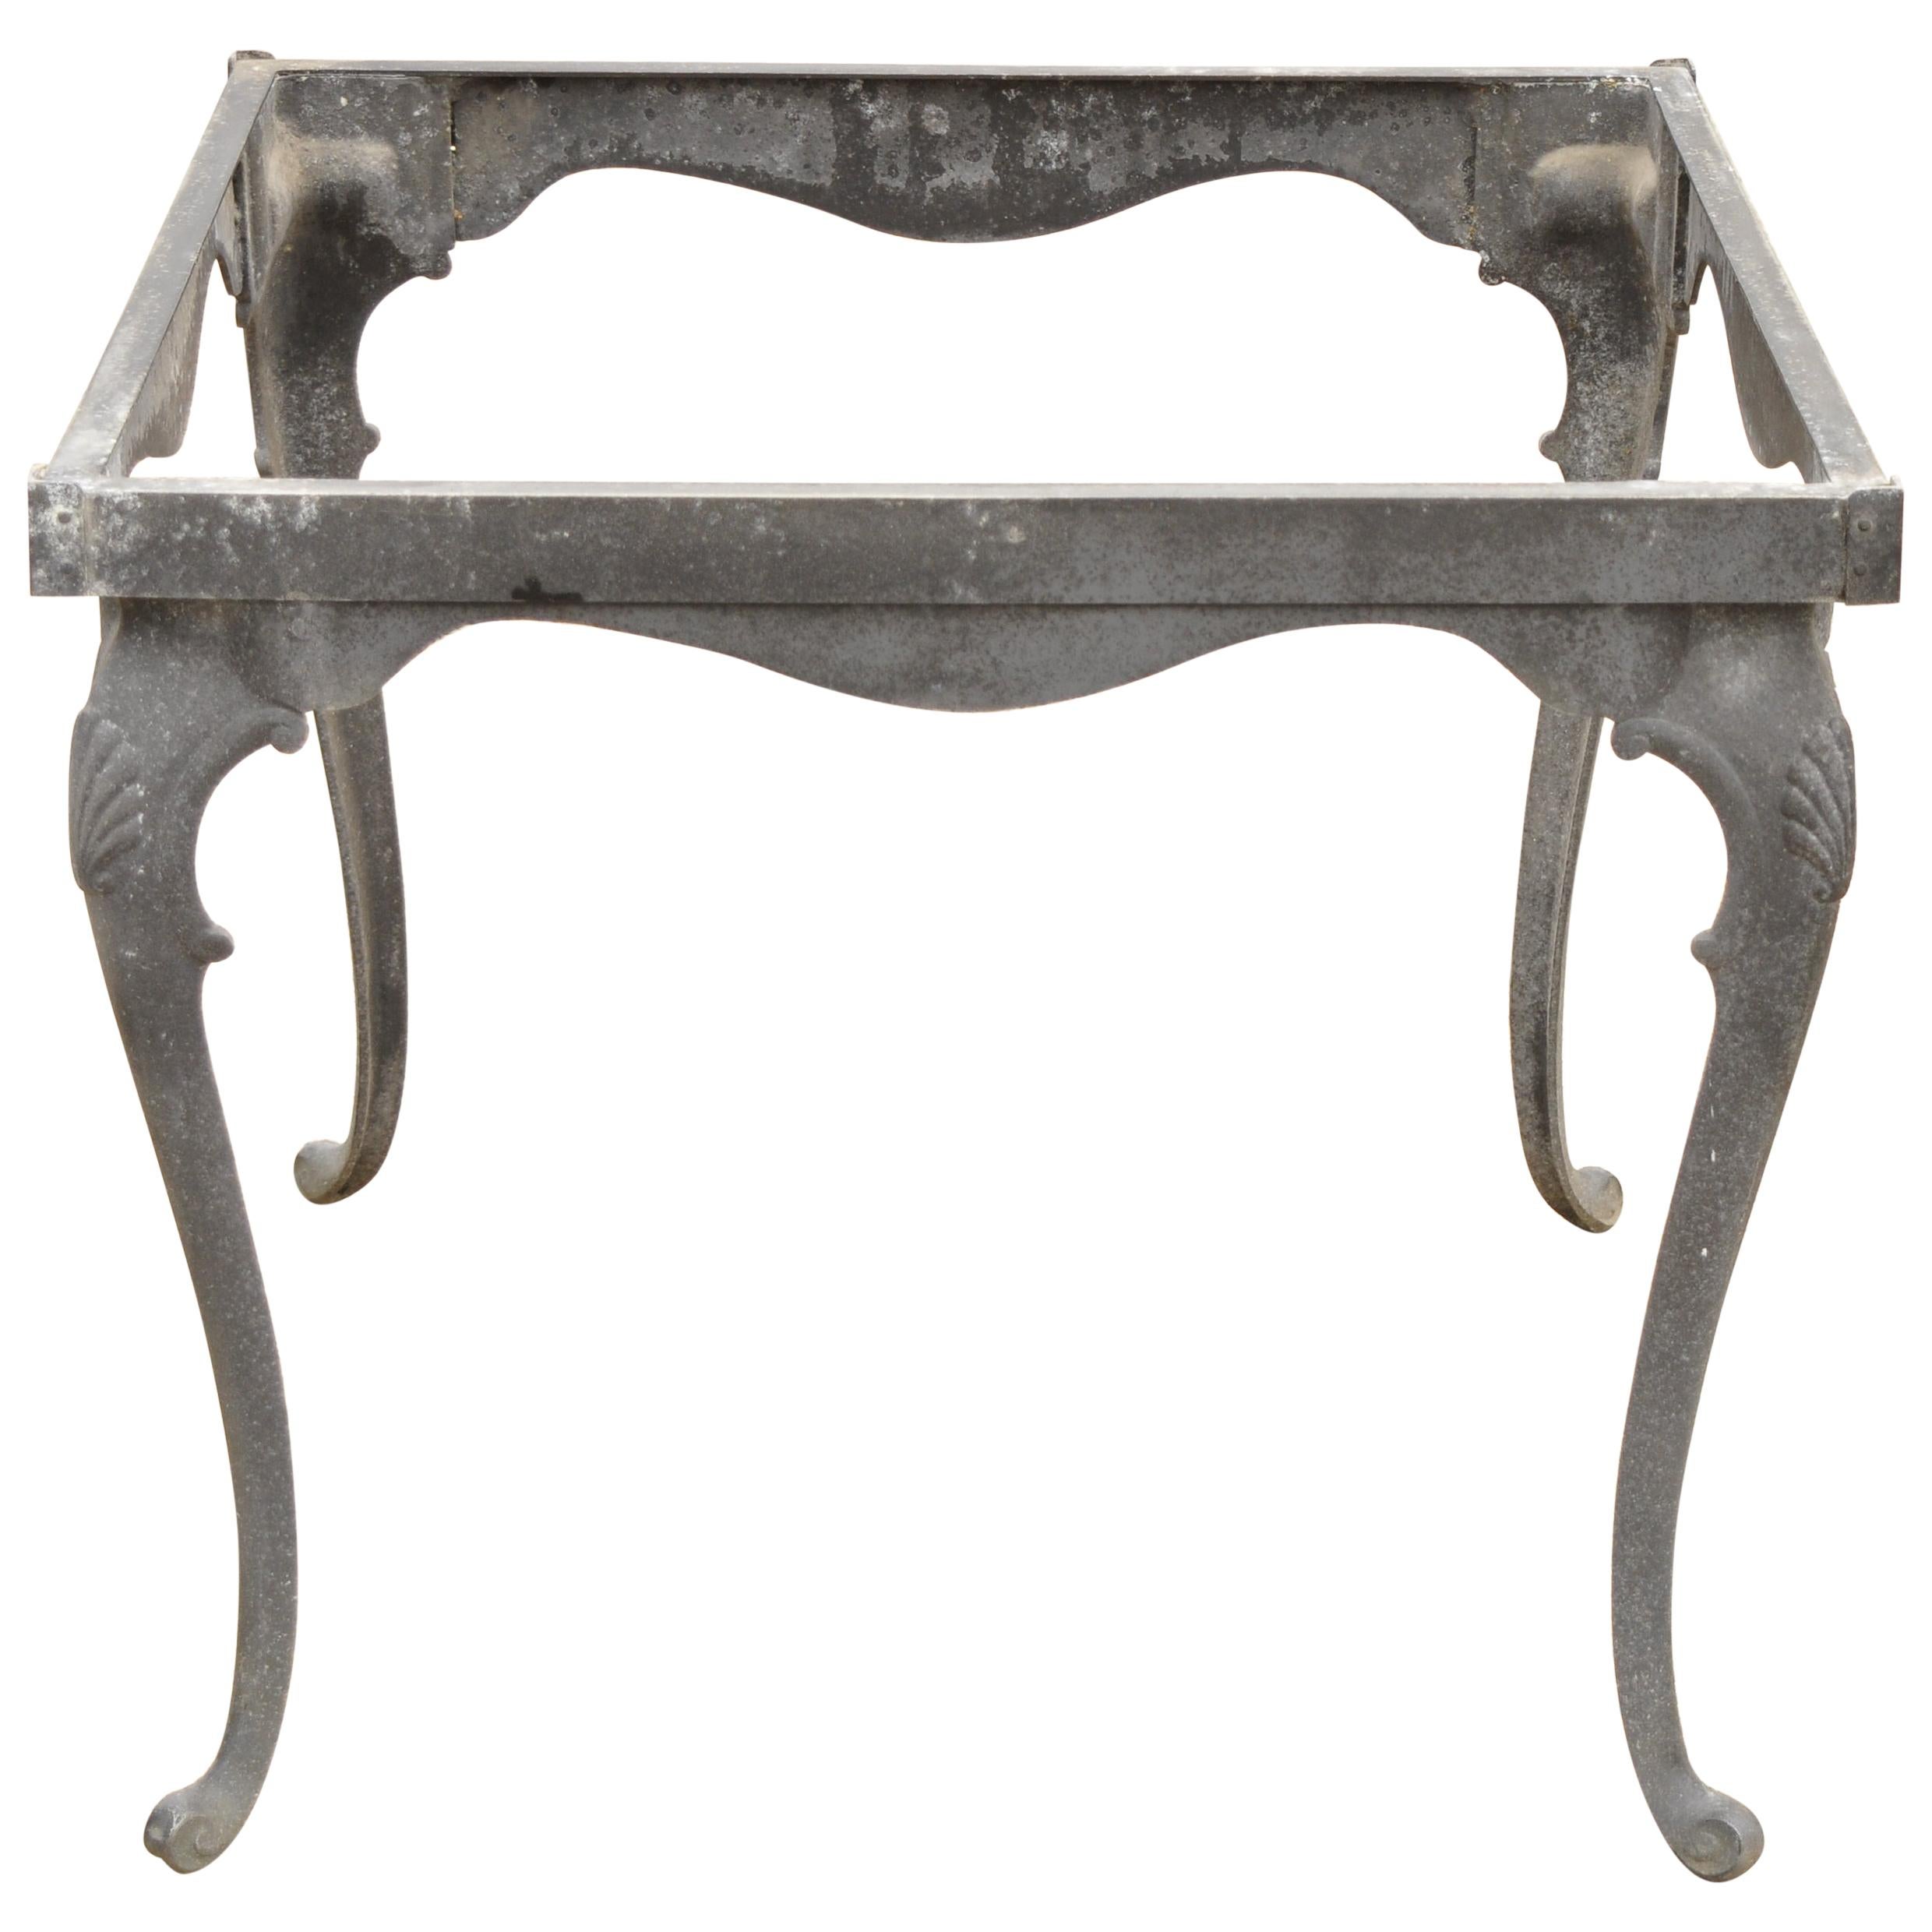 Cast Aluminum Cabriole Leg Shell Square Patio Dining Table Attributed to Molla